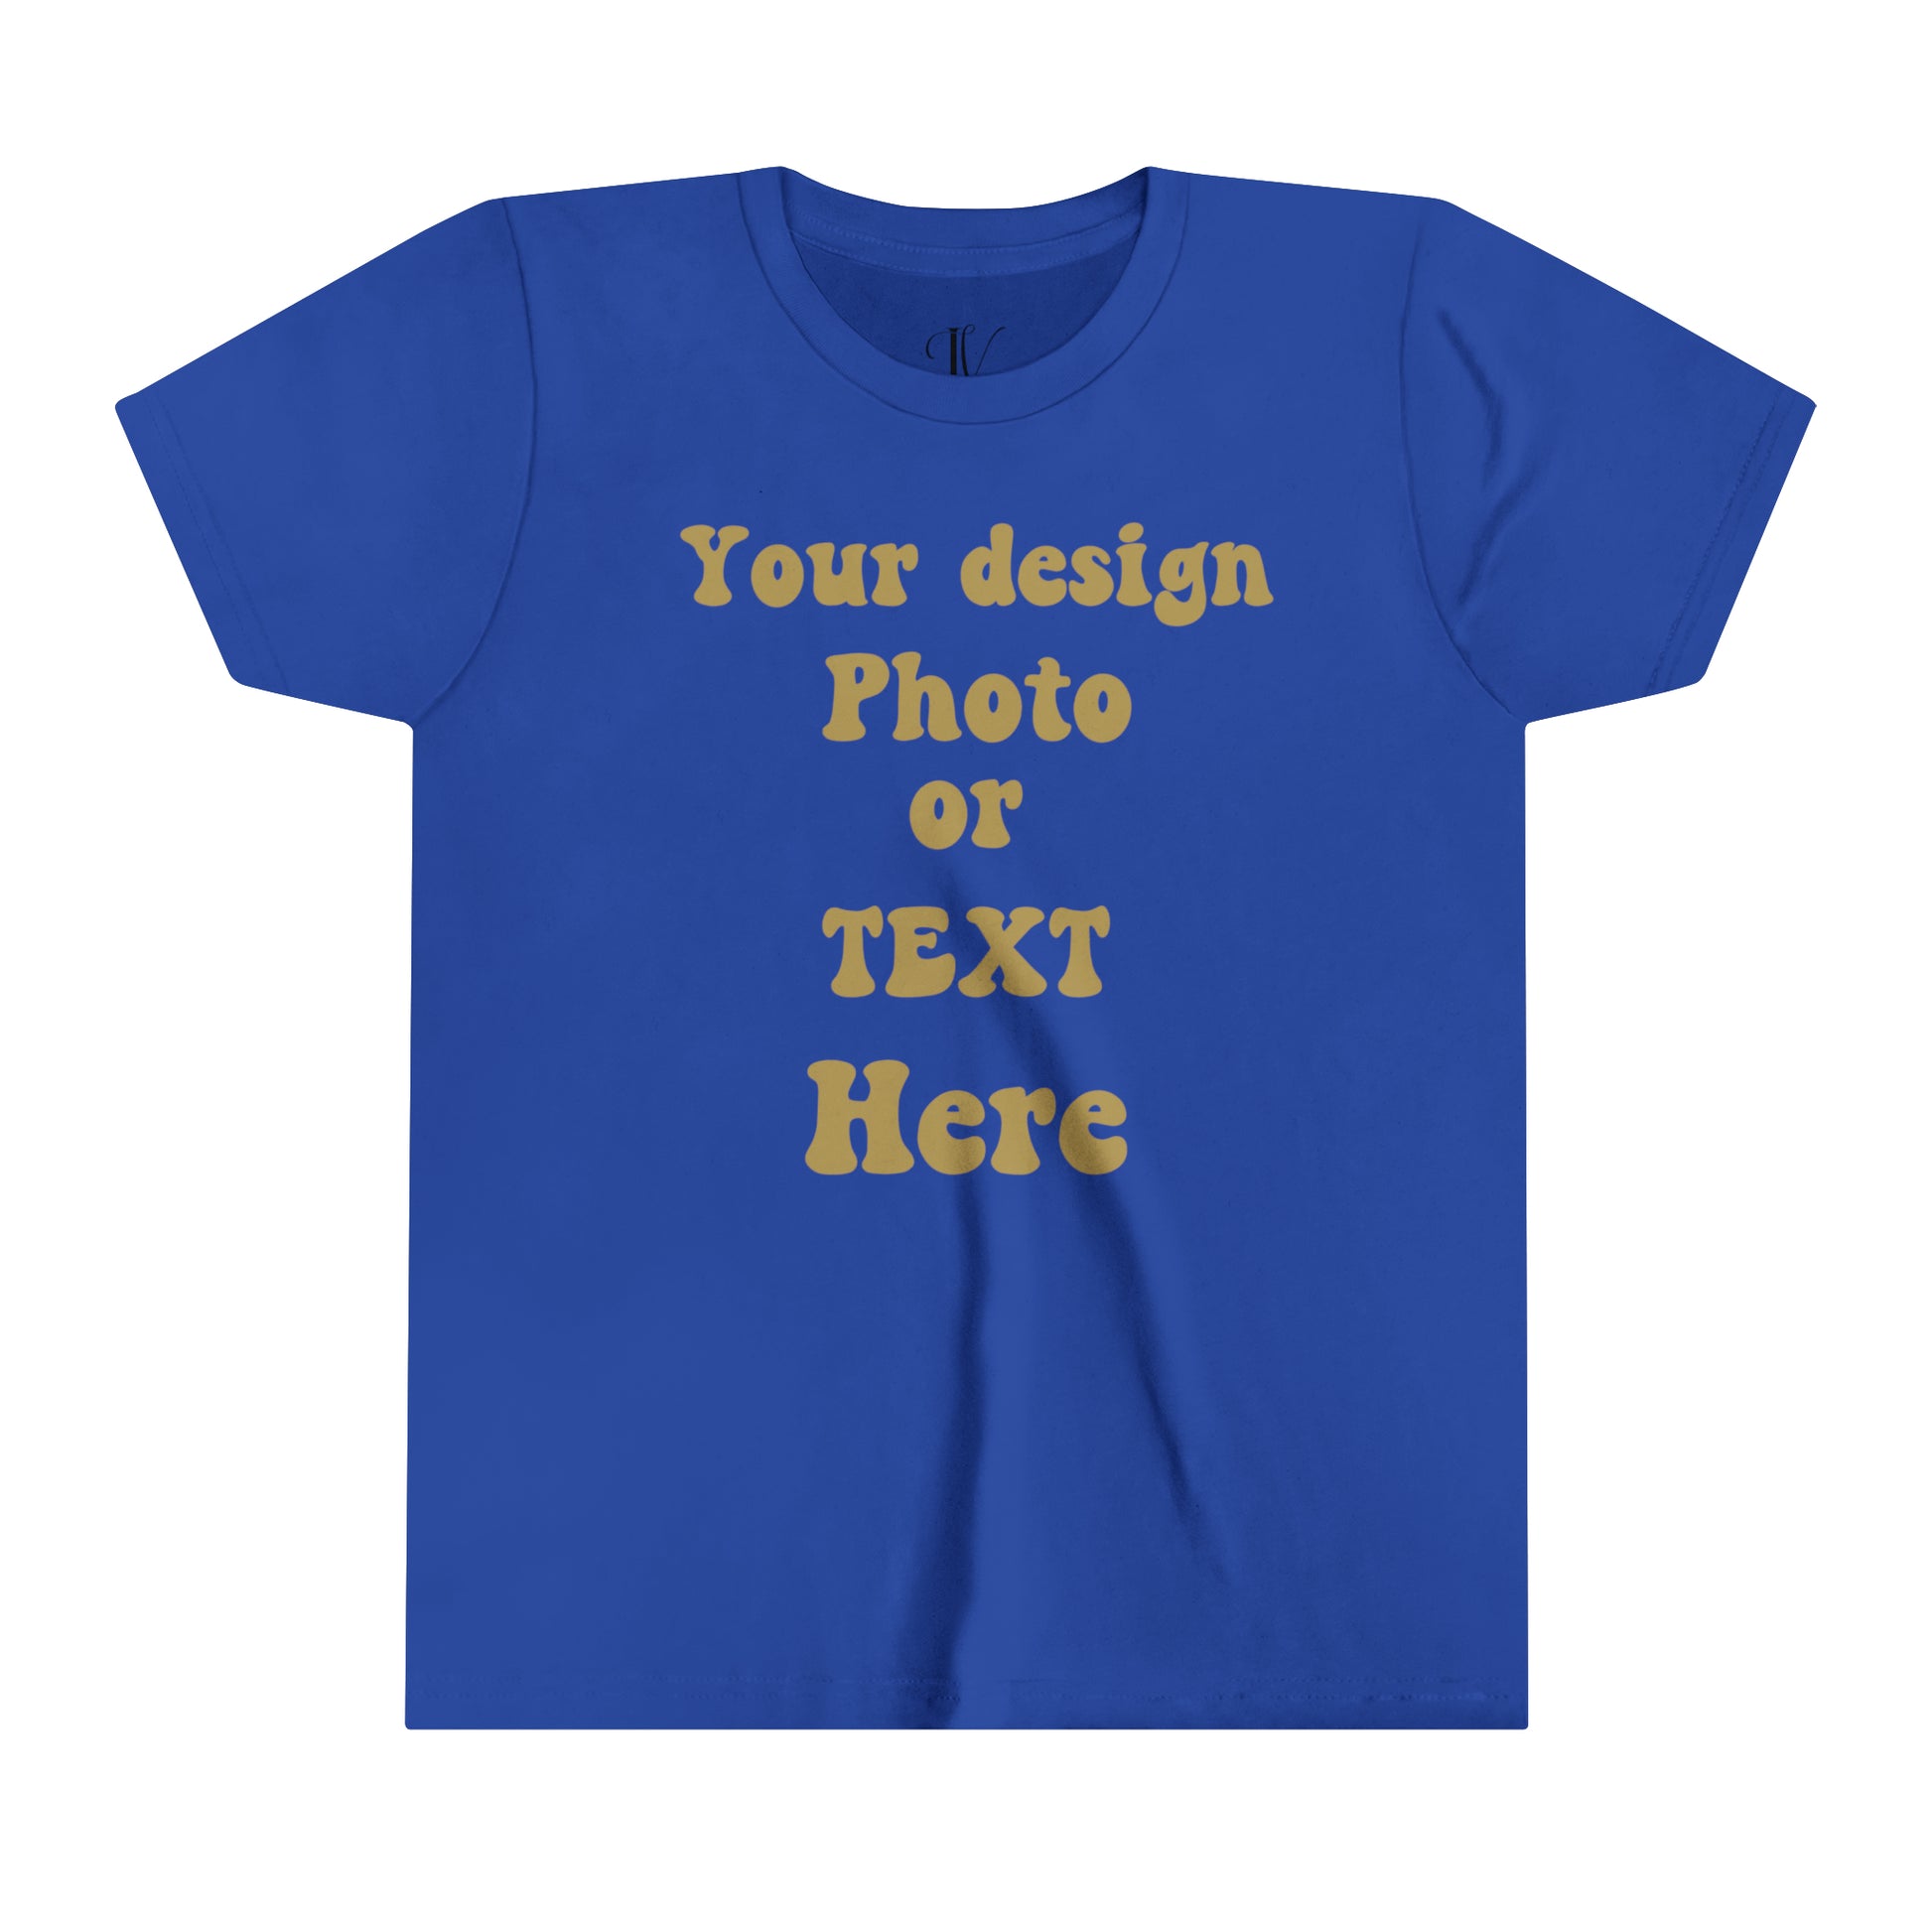 Youth Short Sleeve Tee - Personalized with Your Photo, Text, and Design Kids clothes True Royal S 